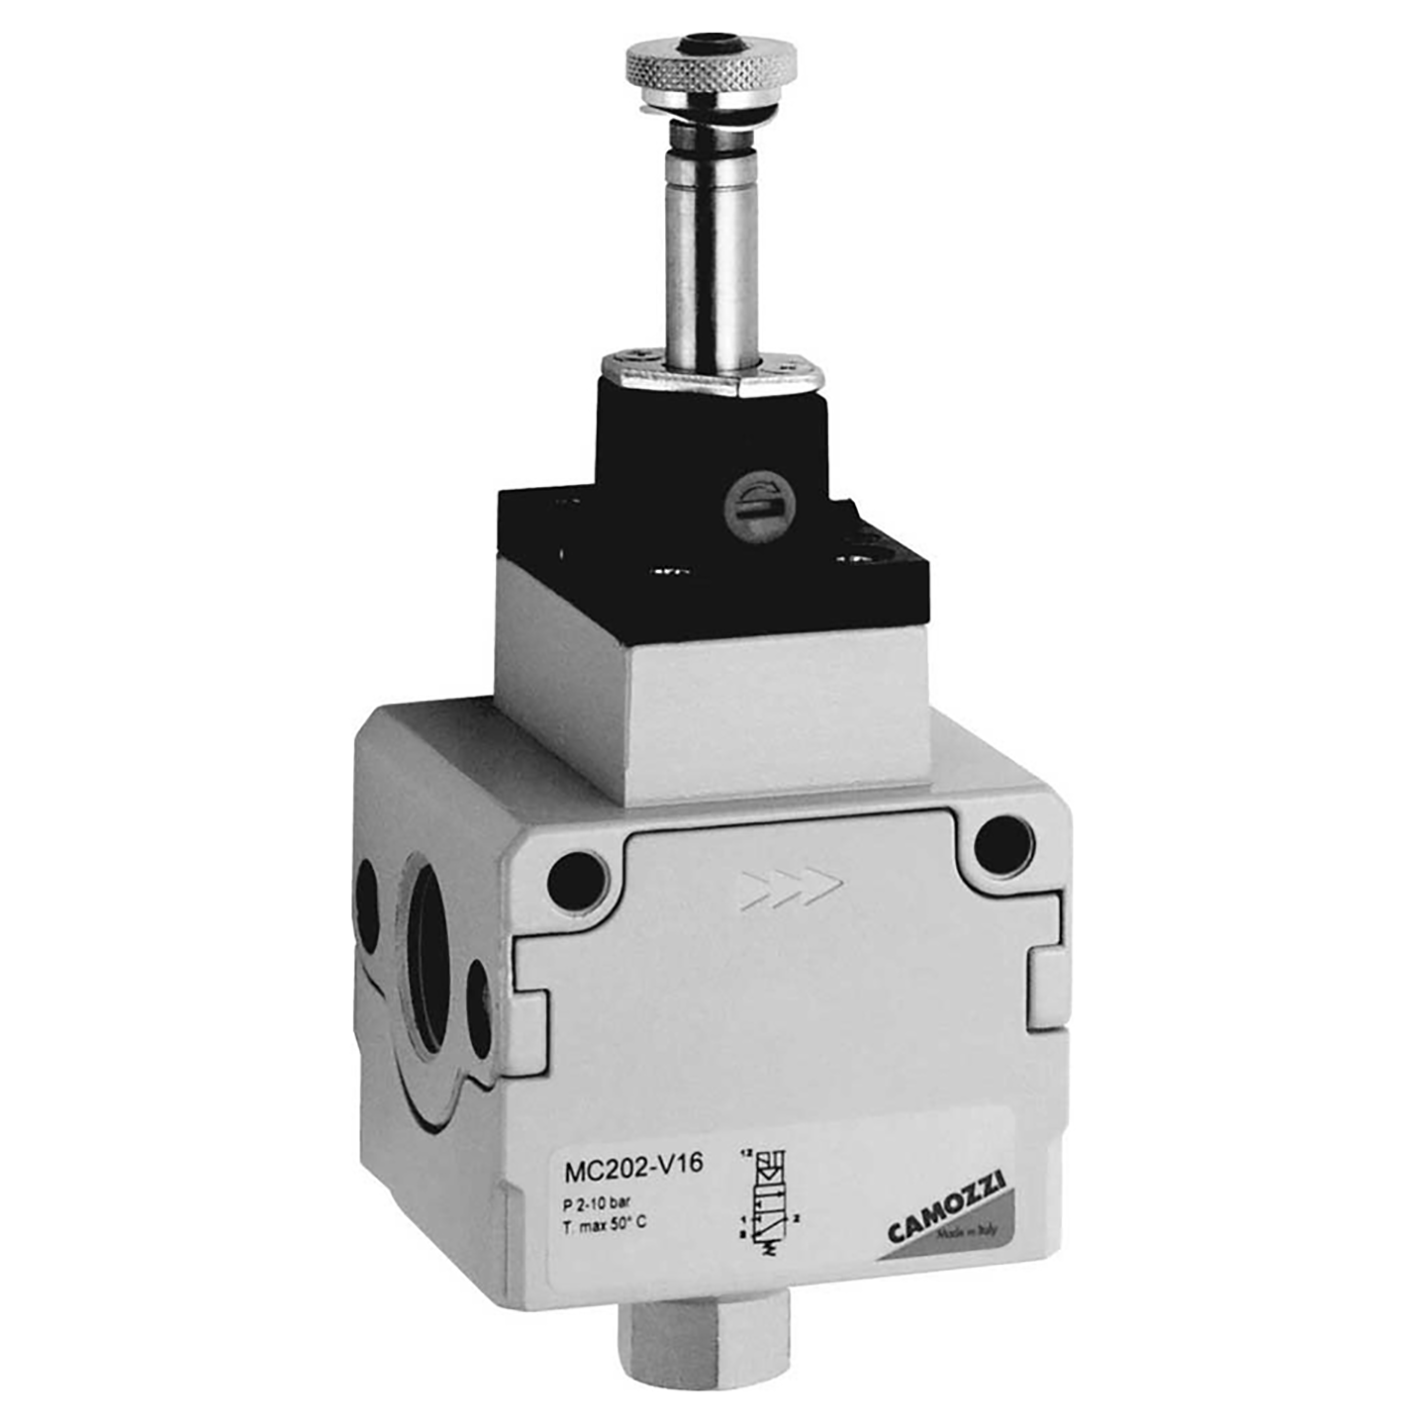 1/2"BSP3/2 ELECTROPNEUMATICALLY OPERATED